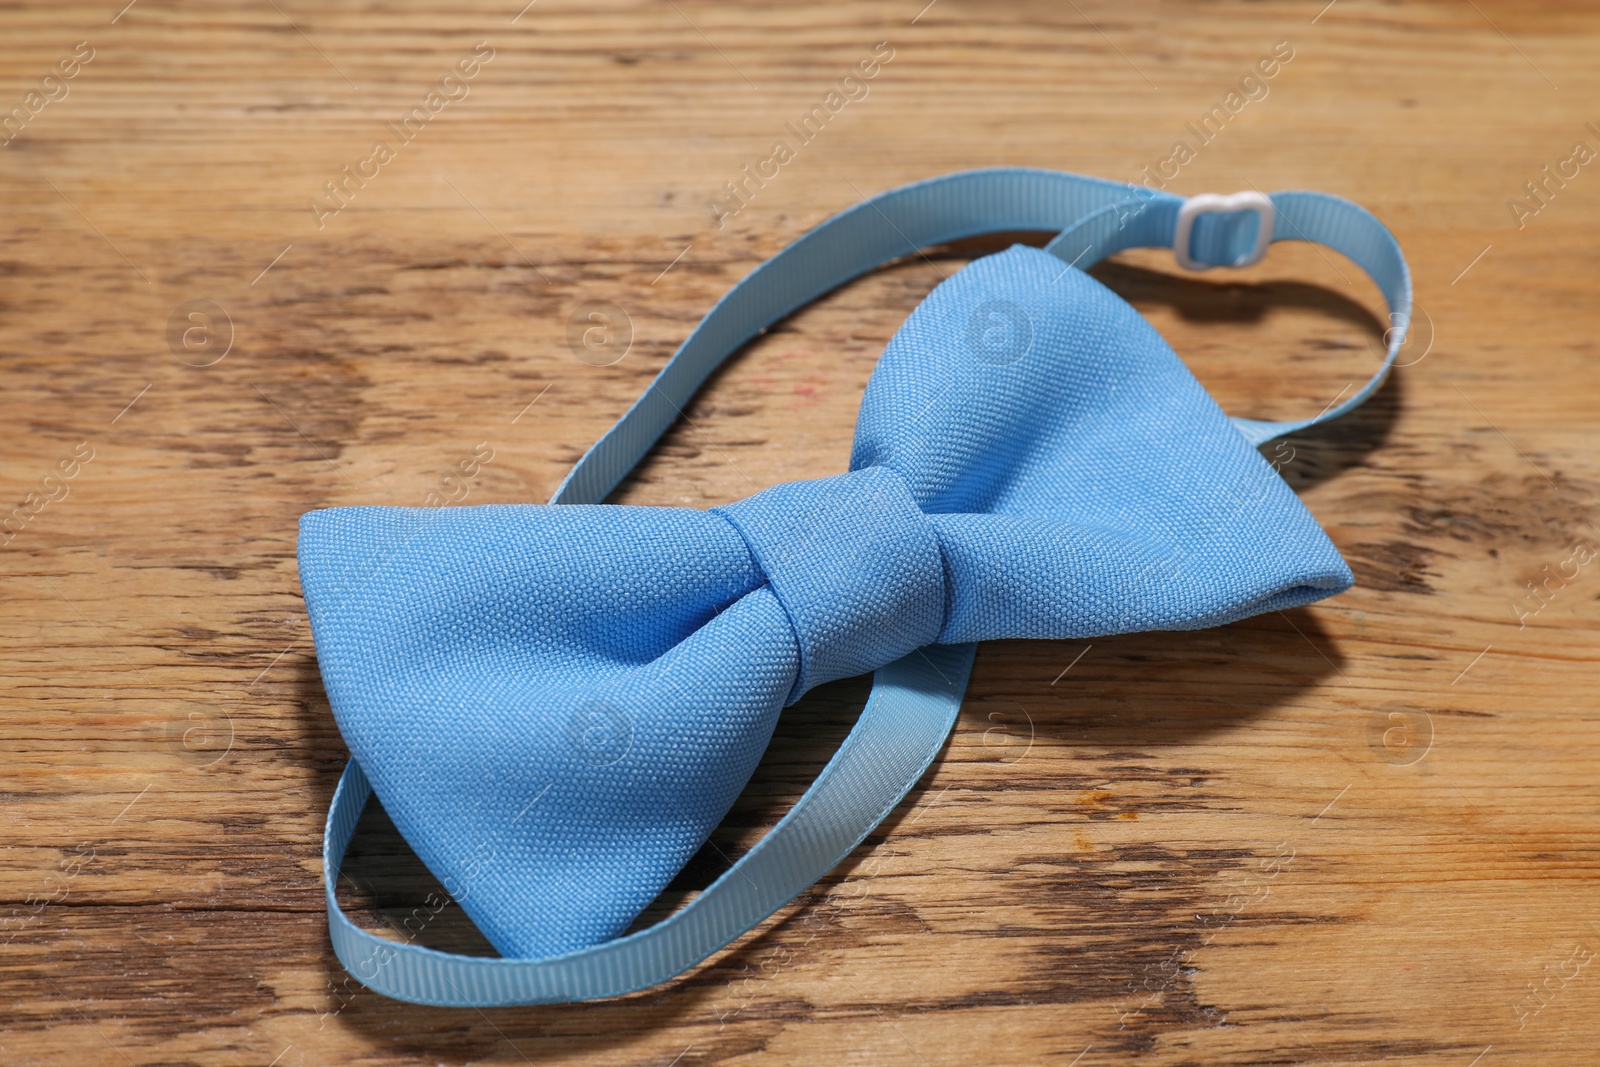 Photo of Stylish light blue bow tie on wooden table, closeup